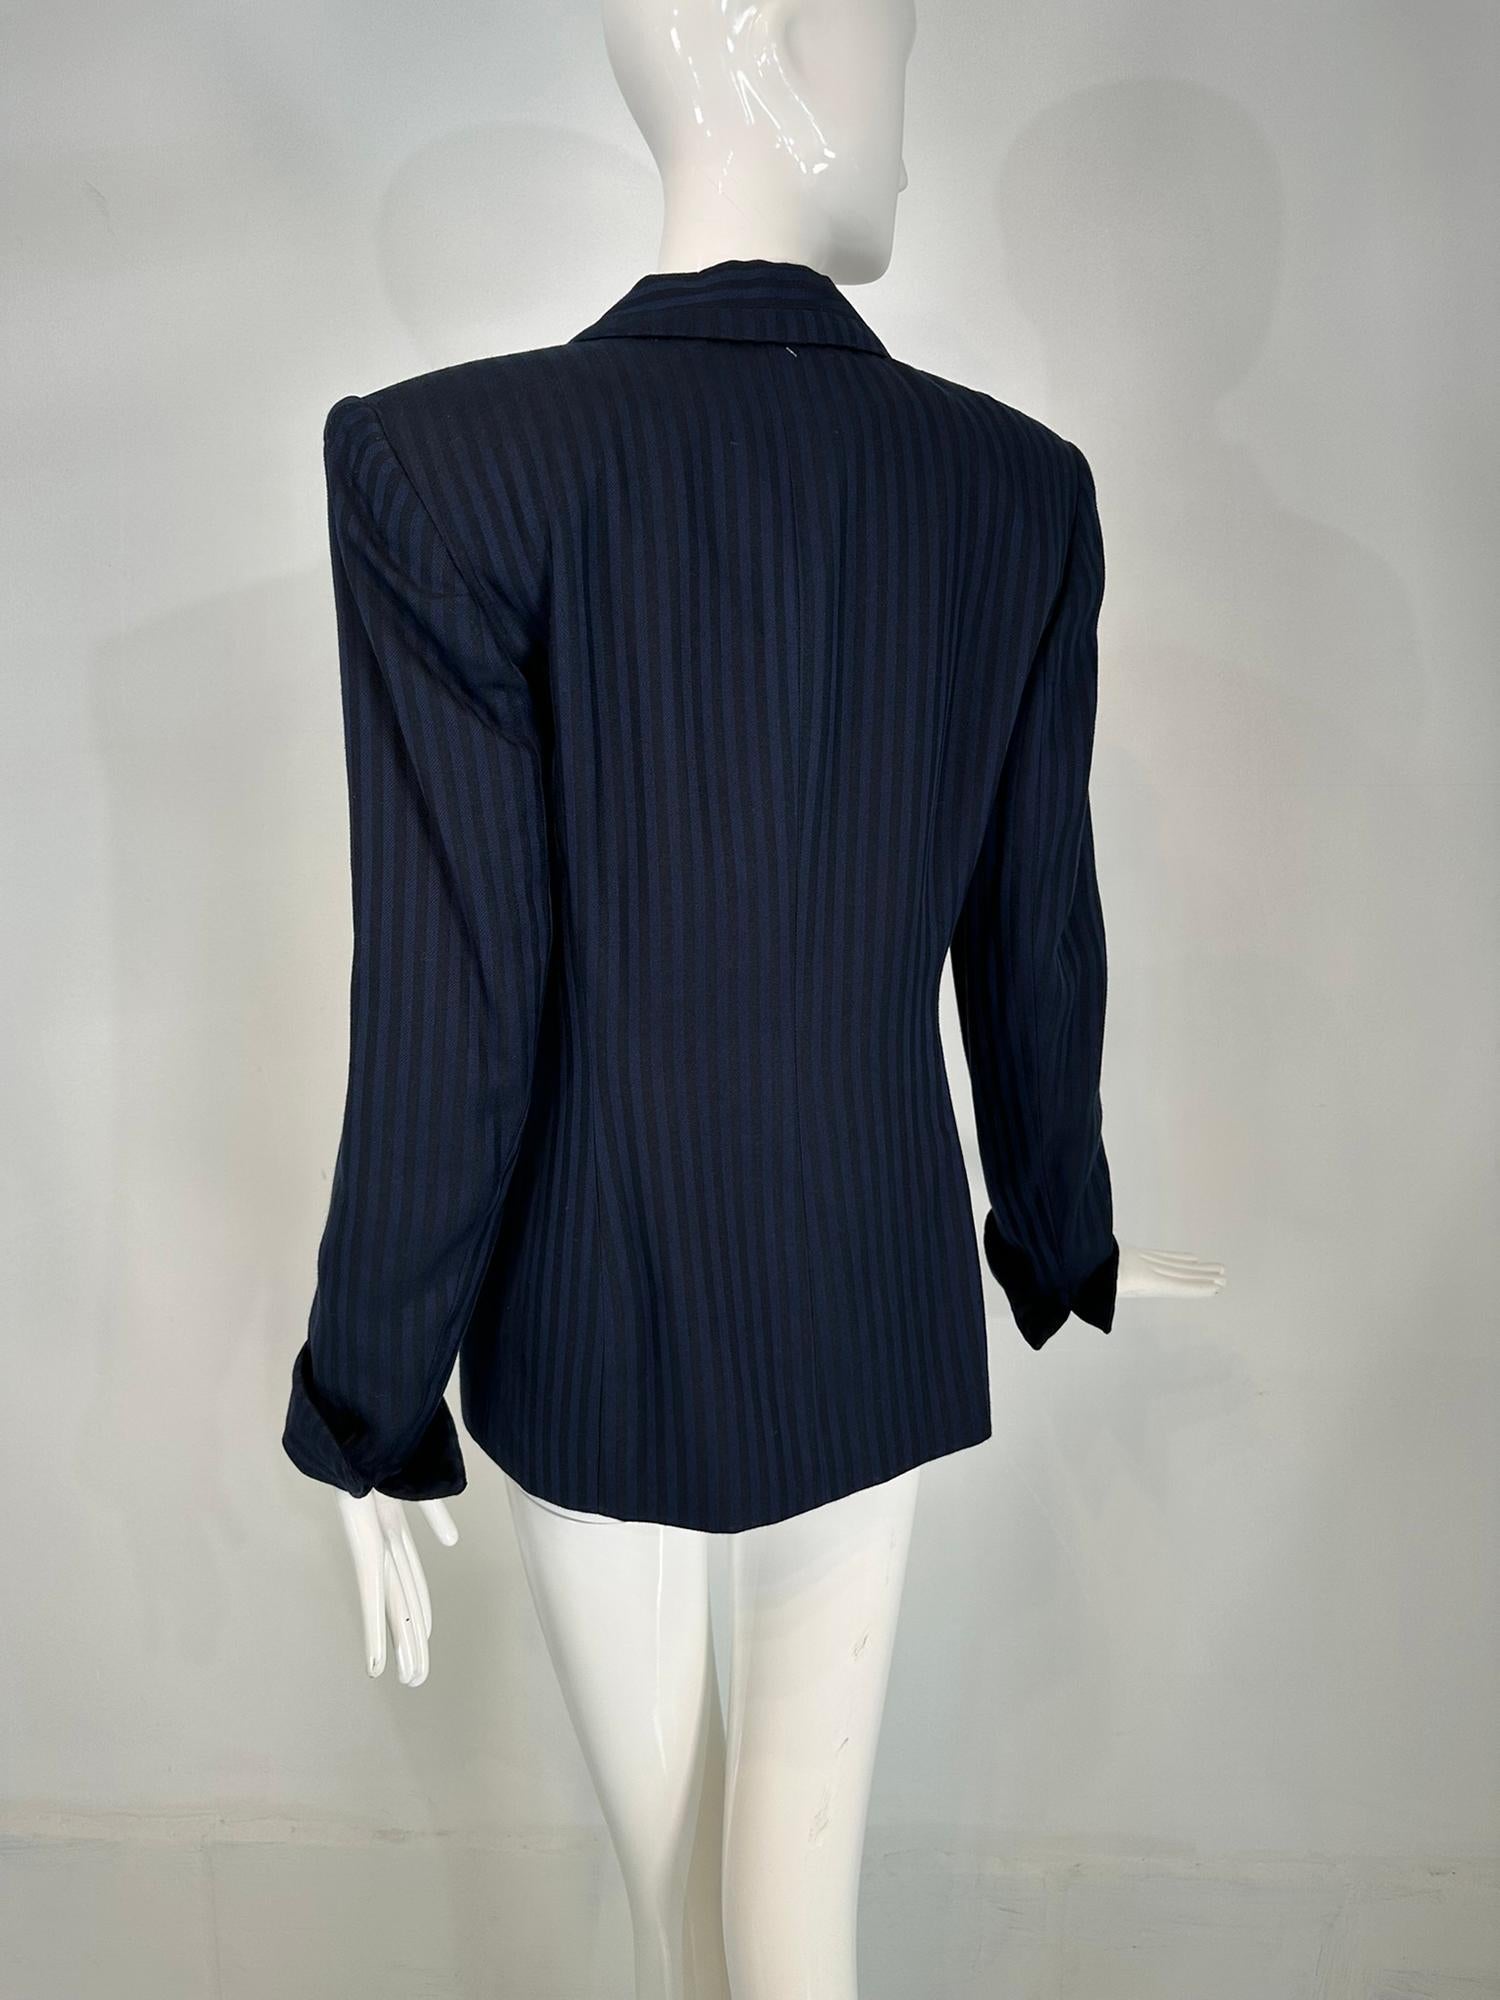 Christian Dior Navy Blue & Black Wide Stripe Wool Twill Jacket Late 90s-2000s 4 For Sale 4